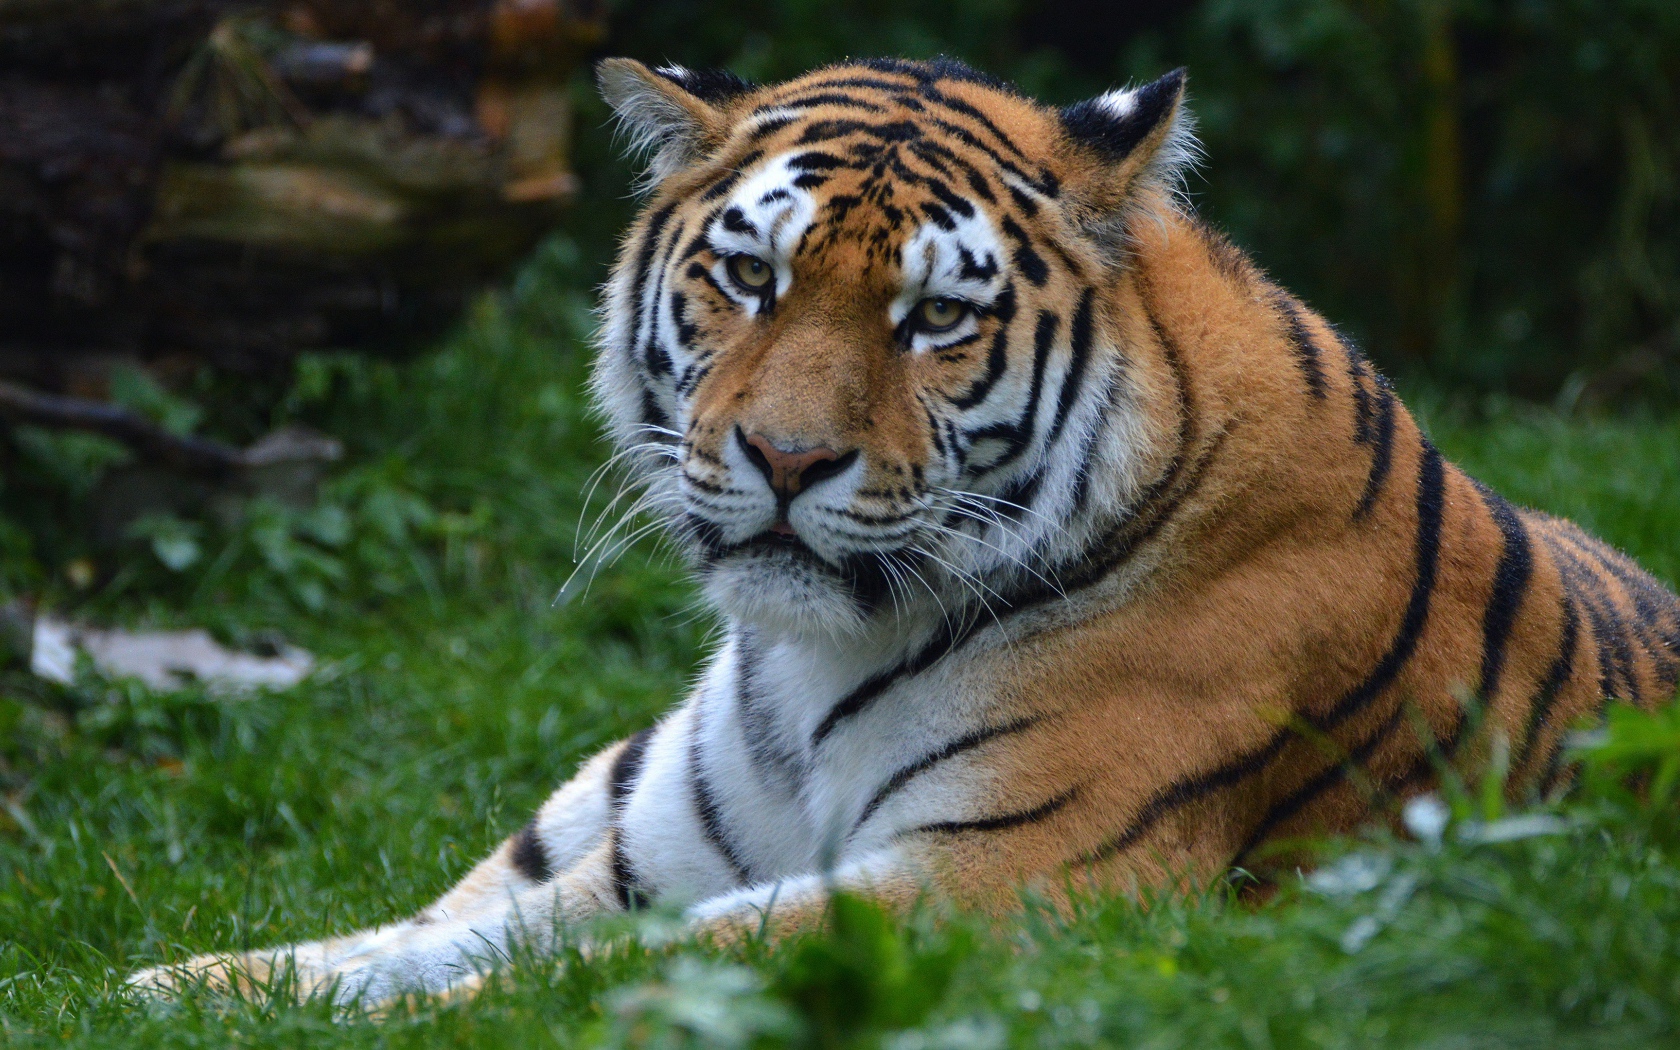 A large striped tiger lies on the green grass